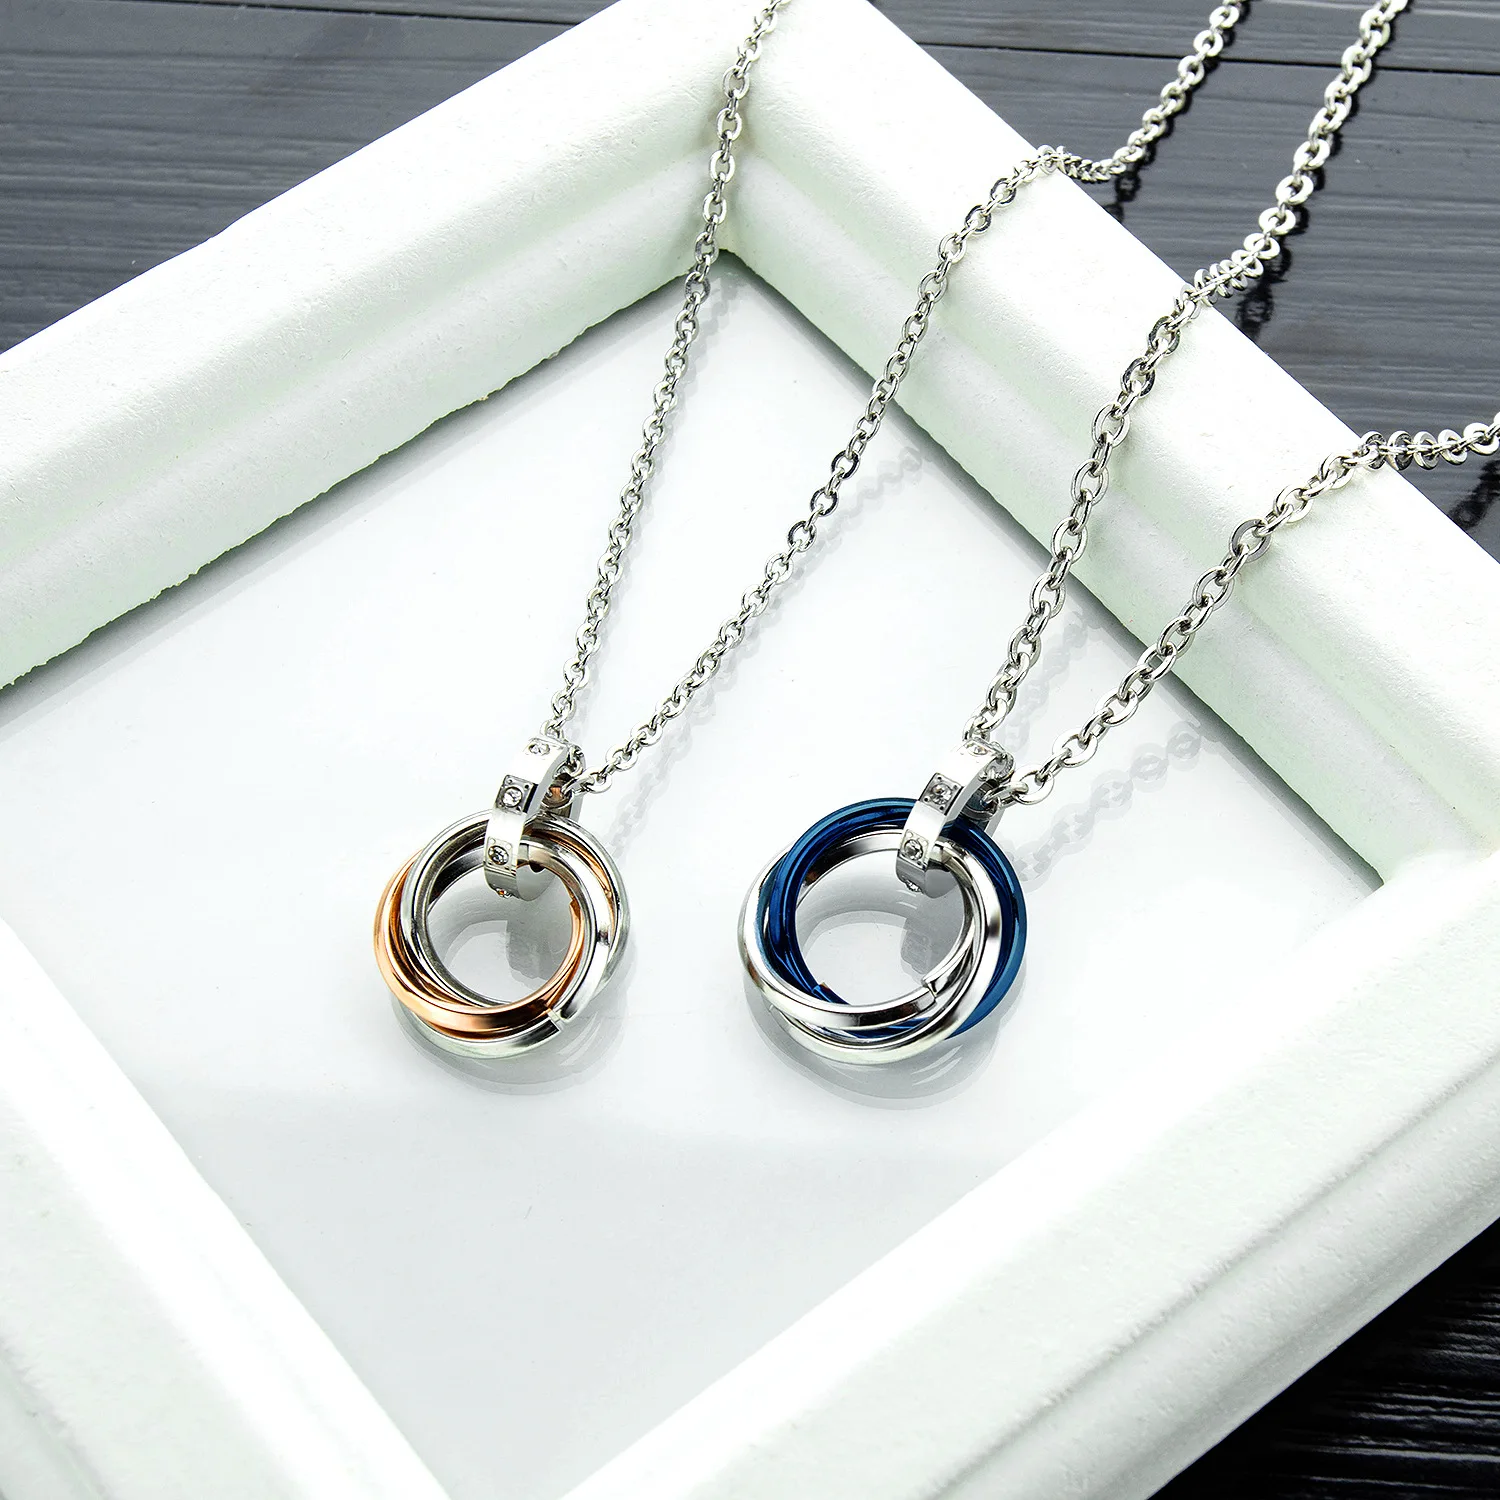 stainless steel necklace for couples double ring valentine's day gift steel jewelry couples necklace pair